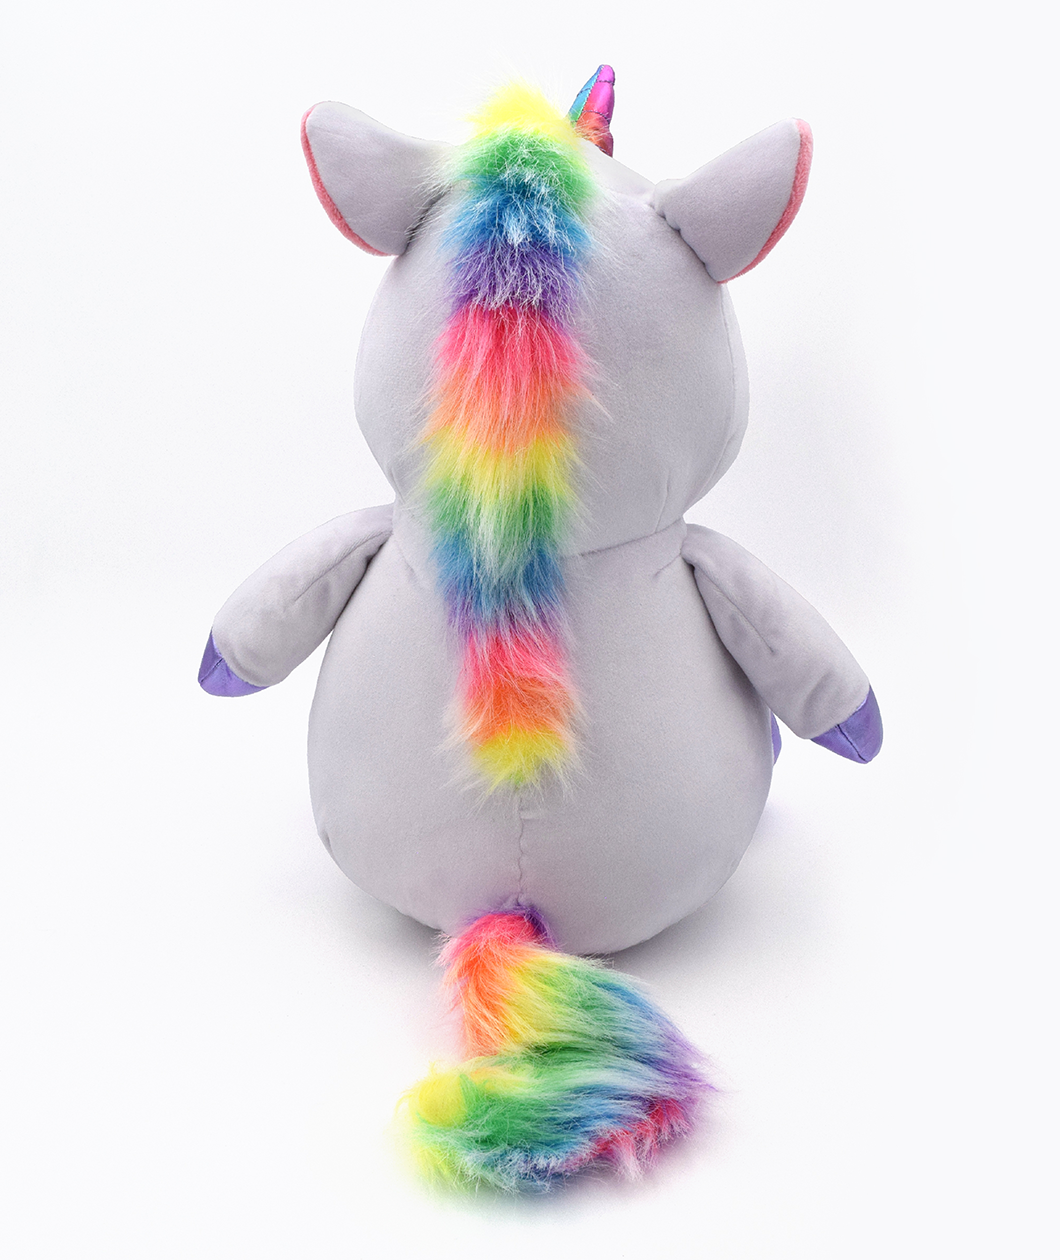 Back of Garyl plushie shows the rainbow fur mane that flows from the top of its head to the middle of its back. Then it has a rainbow fur tail as well.